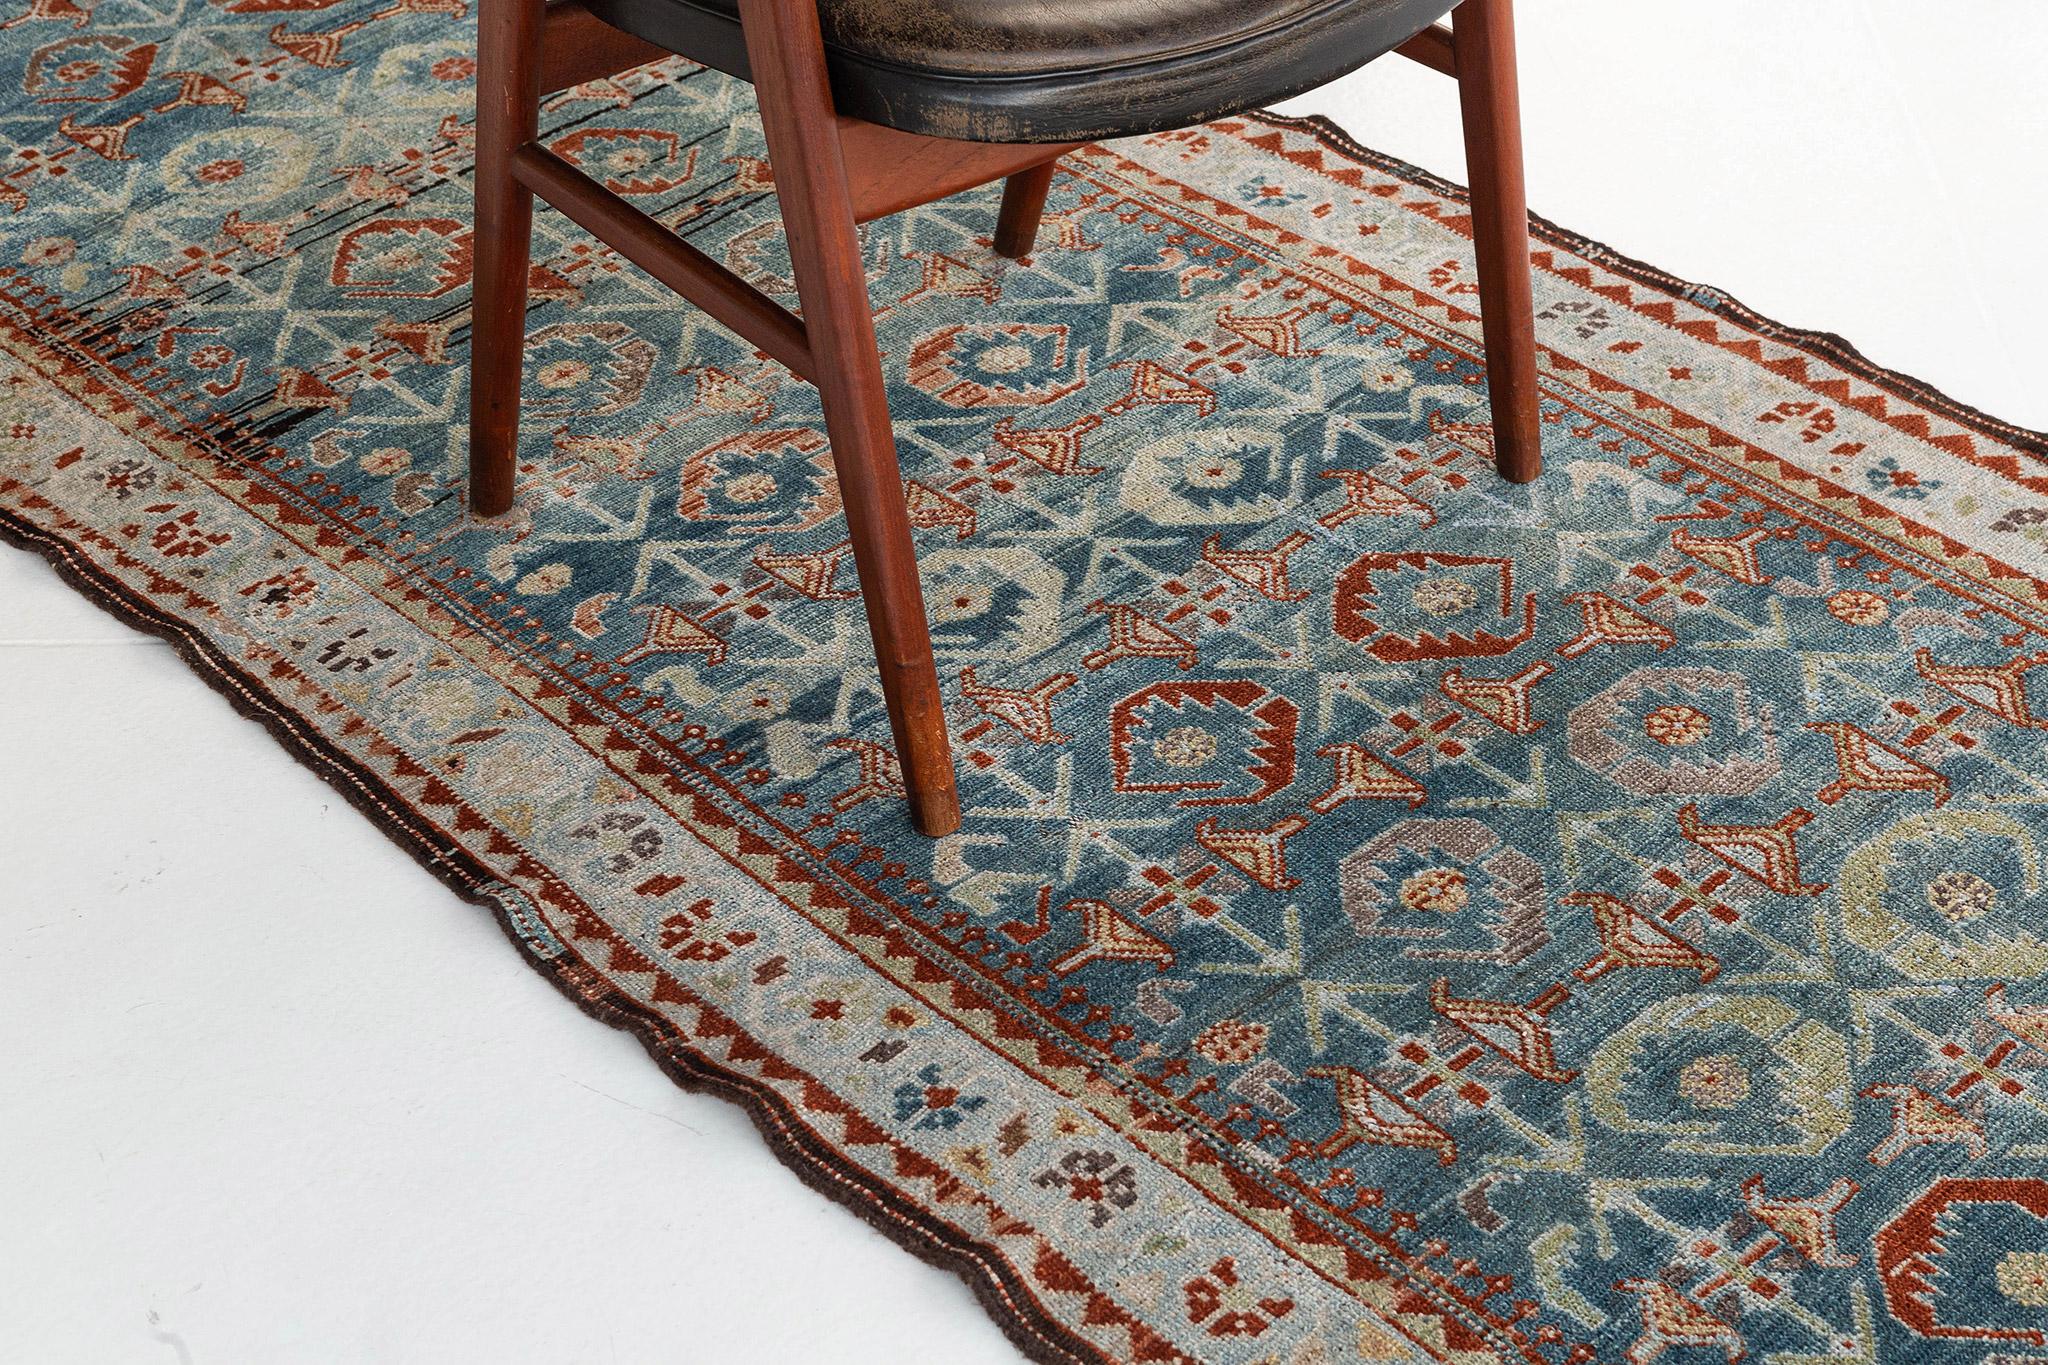 This Persian Malayer Runner is a true beauty with its arraying, eye-catching colors and design. The center is highlighted with a beautiful ocean blue, encapsulated in a large hexagon that goes almost from end to end on the carpet. Border the